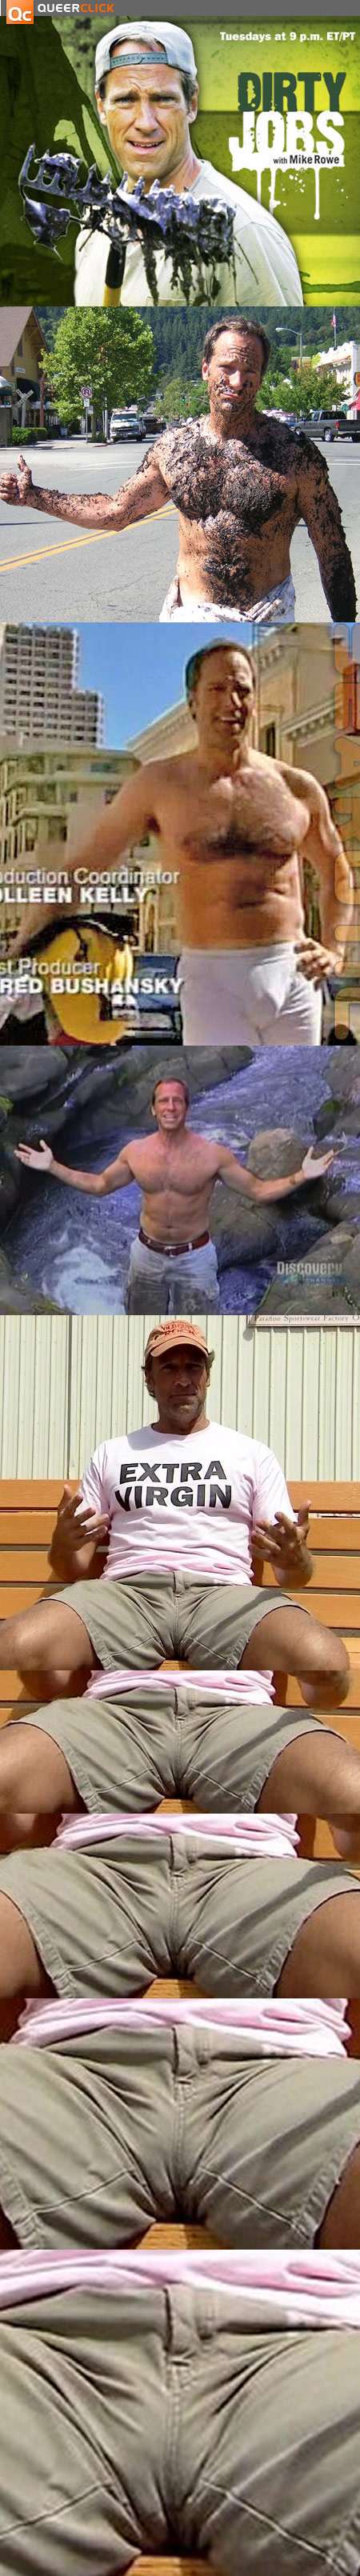 Who Will Give Mike Rowe A Dirty (Blow) Job?